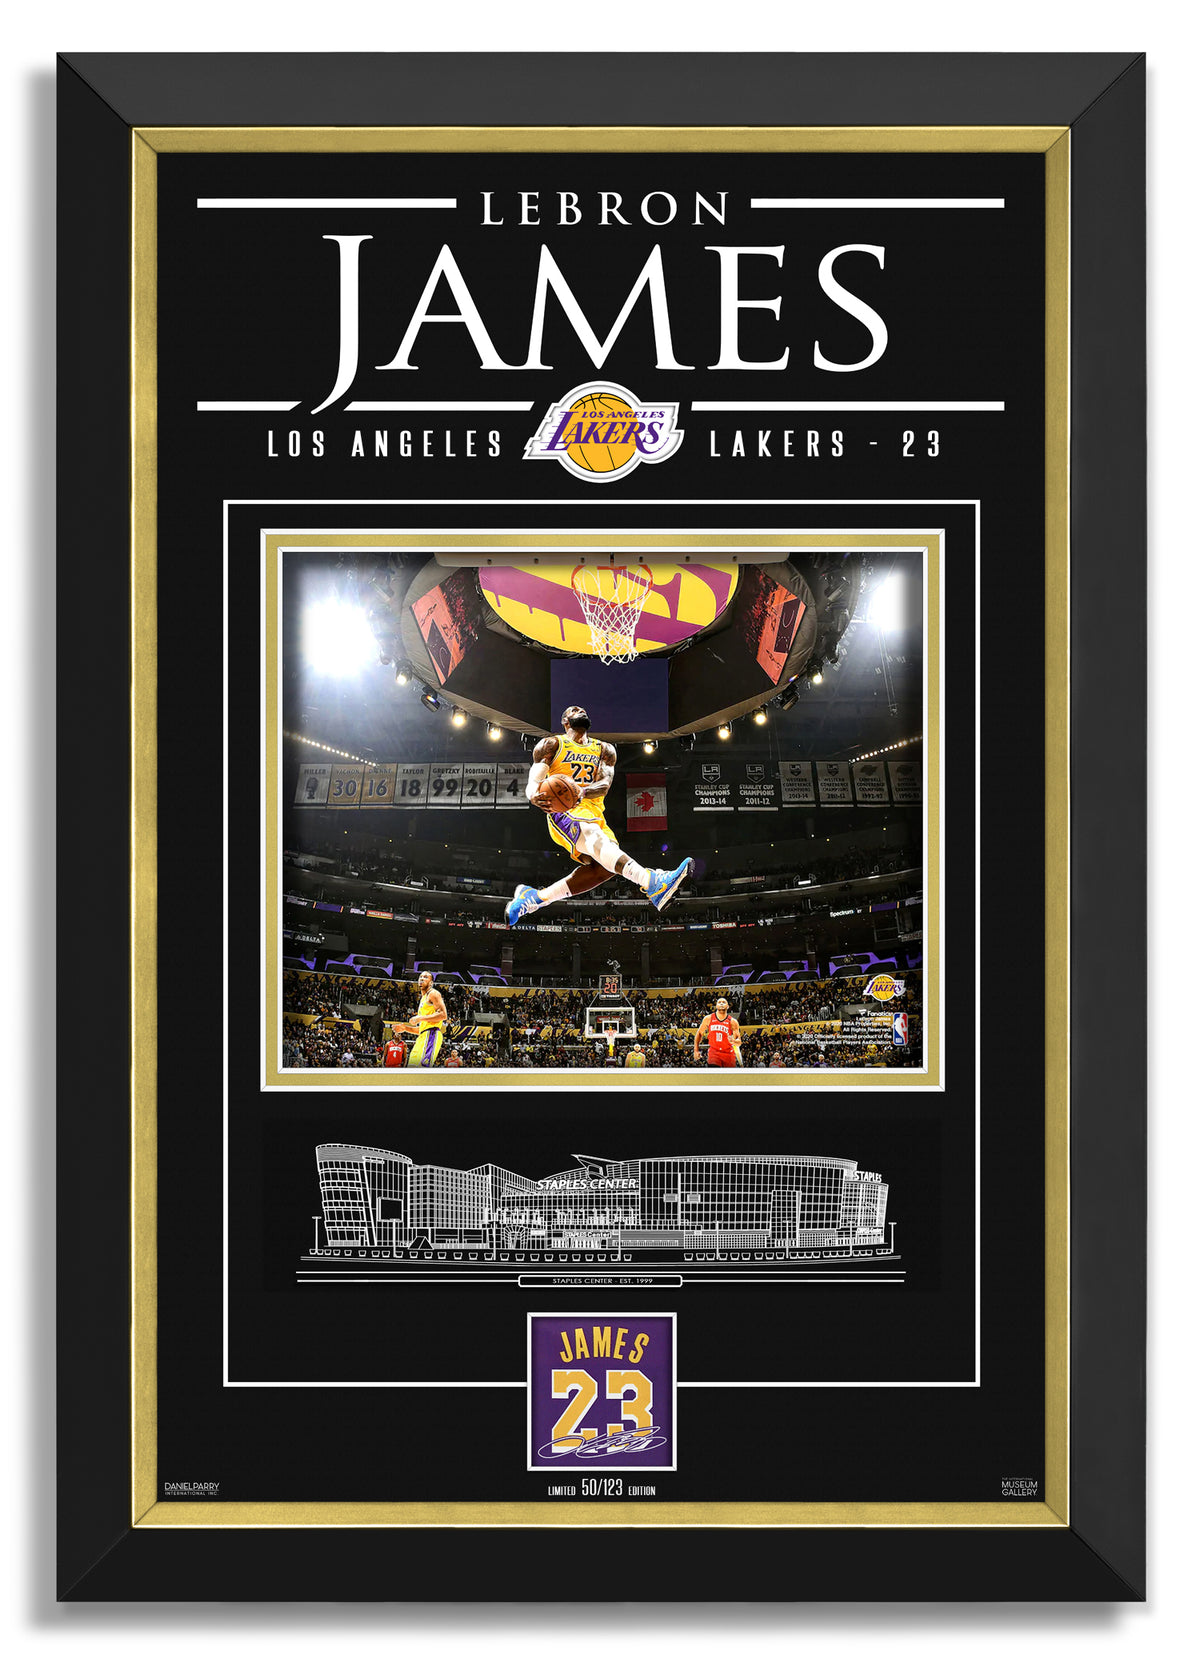 LeBron James Autographed Memorabilia, Signed, Inscribed and 100% Authentic